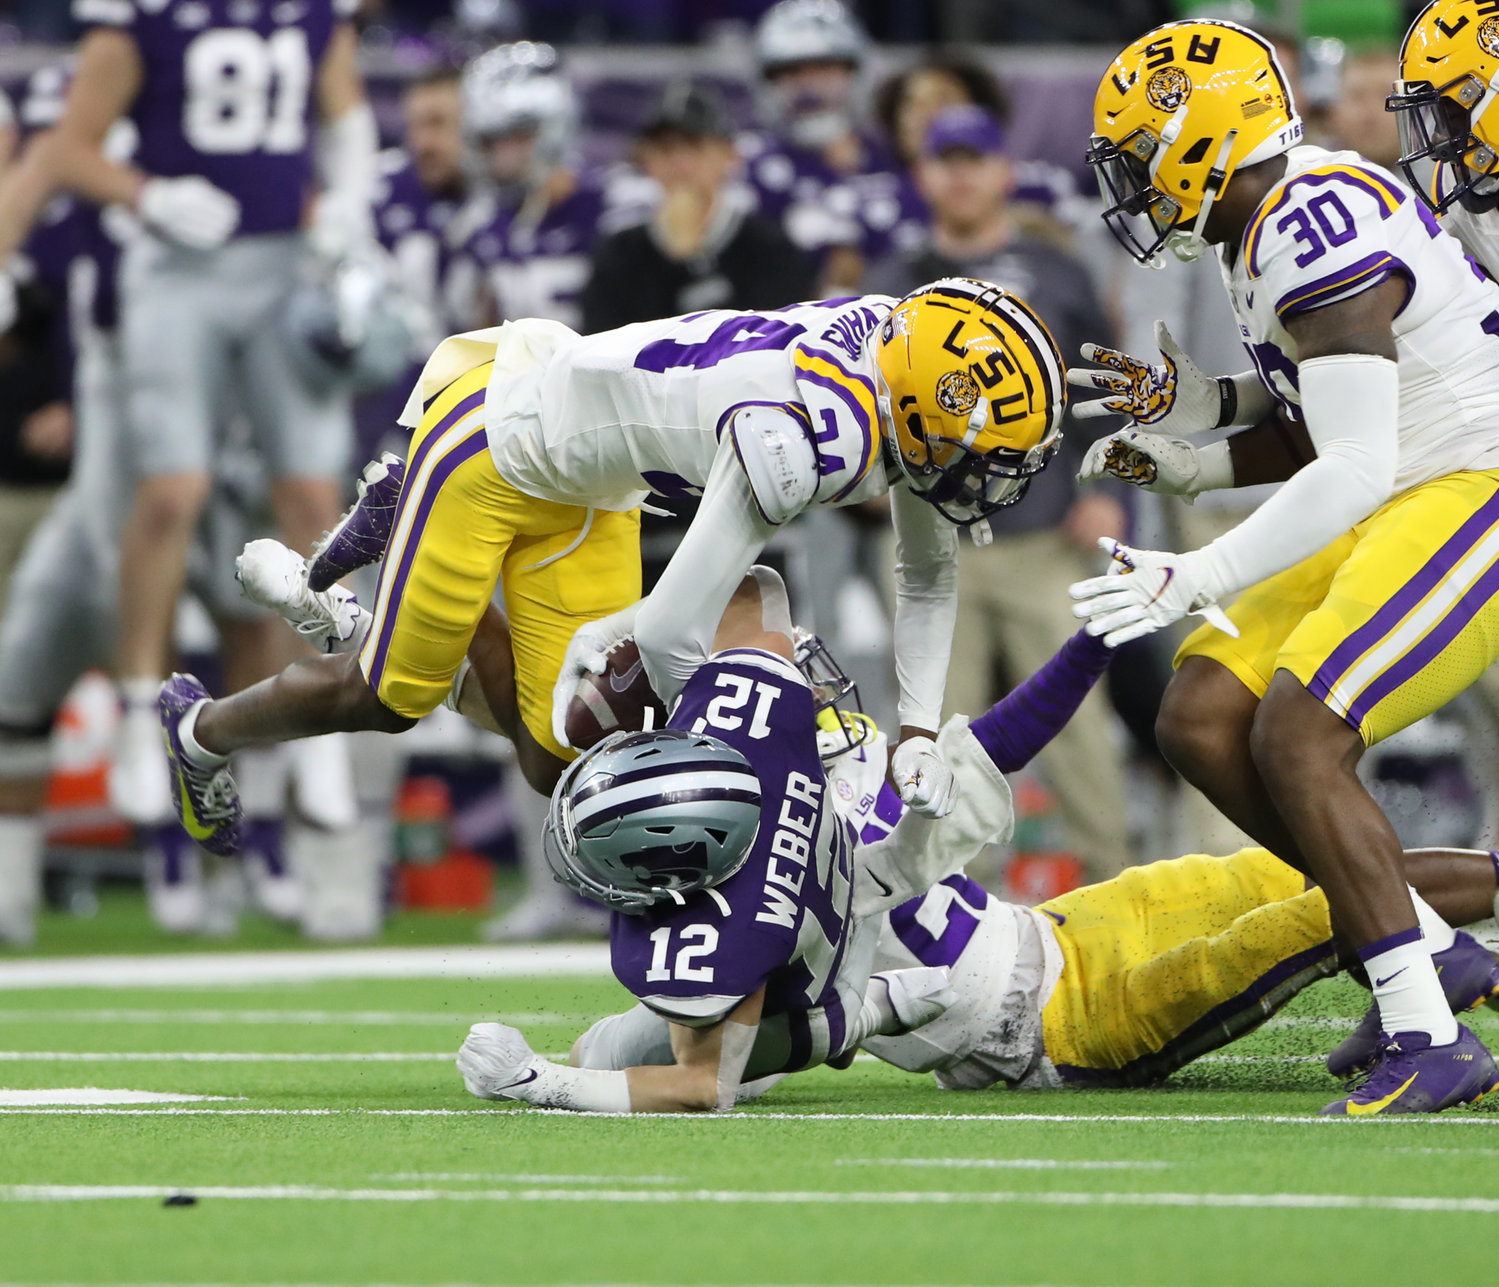 LSU Tigers cornerback Darren Evans (24) dives in as Kansas State Wildcats wide receiver Landry Weber (12) is tackled during the TaxAct Texas Bowl on Jan. 4, 2022 in Houston, Texas.